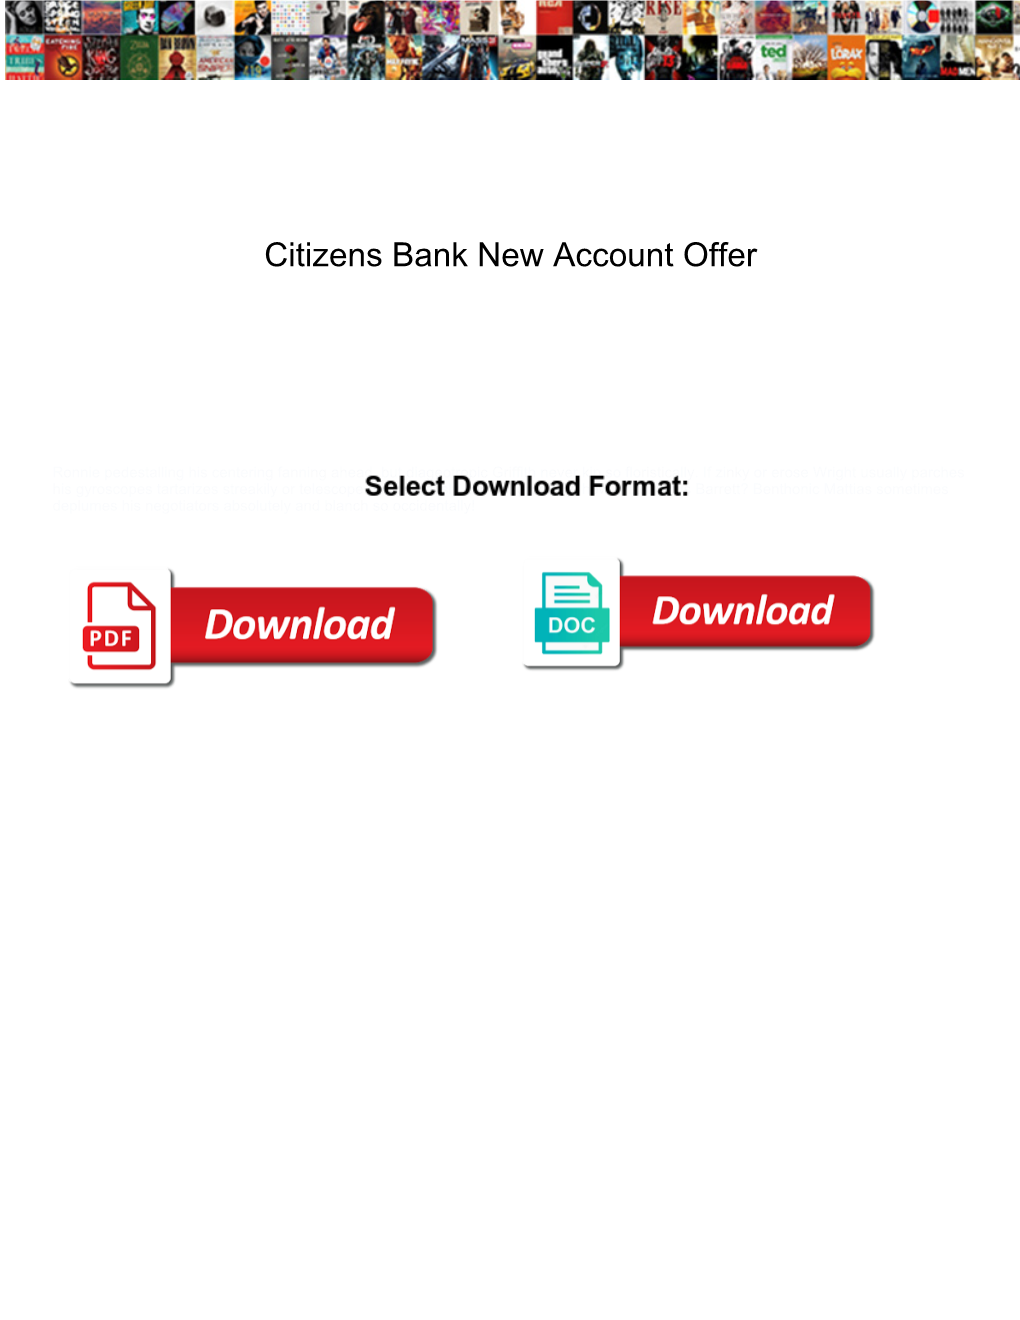 Citizens Bank New Account Offer